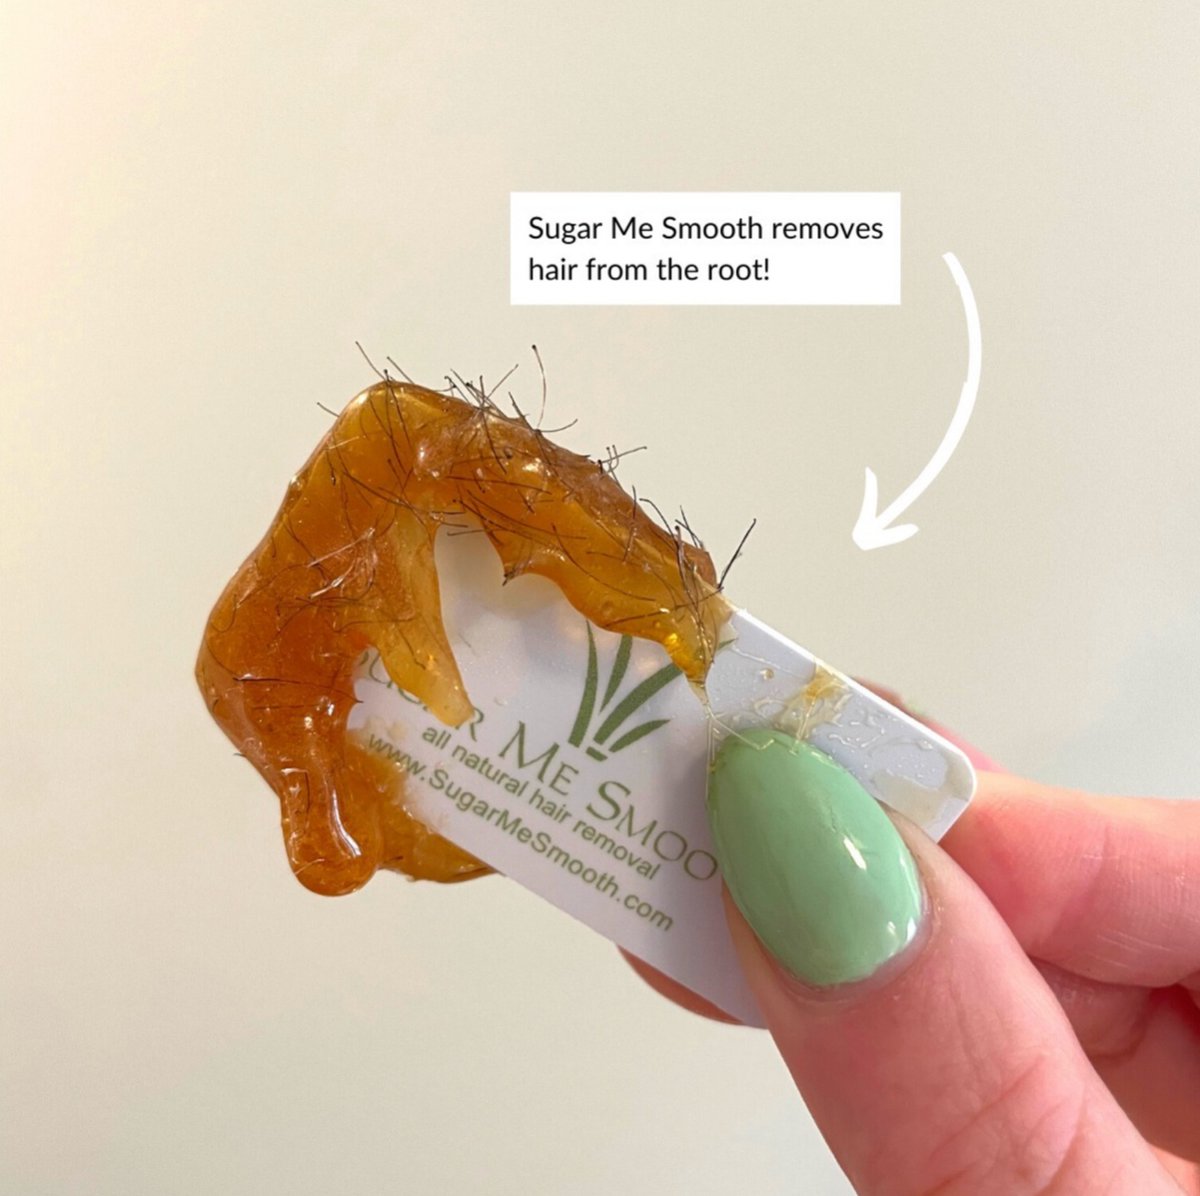 Ever noticed the little dots at the base of your hair after using our Sugar Wax!? Those are the hair bulbs! That's a good sign that you're successfully removing hair from the root 🎉

#sugarwax #sugaring #hairremoval #naturalskincare #sugarmesmooth